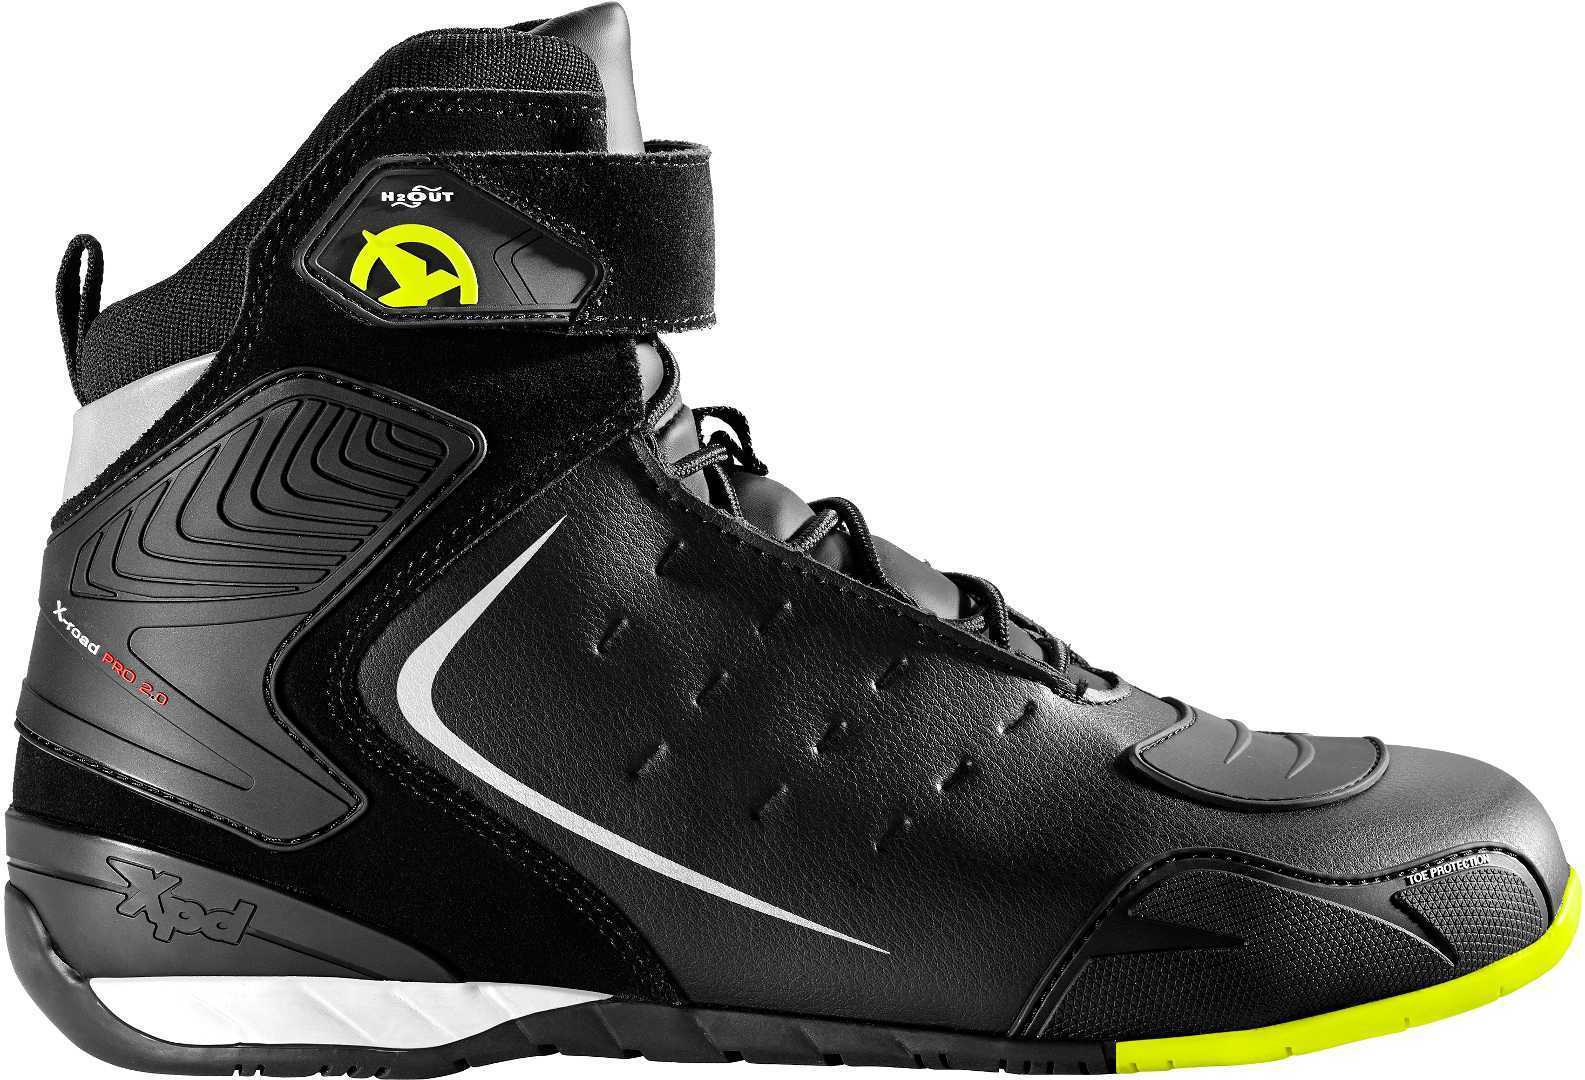 Image of XPD X-Road H2Out Yellow Fluo Size 47 EN